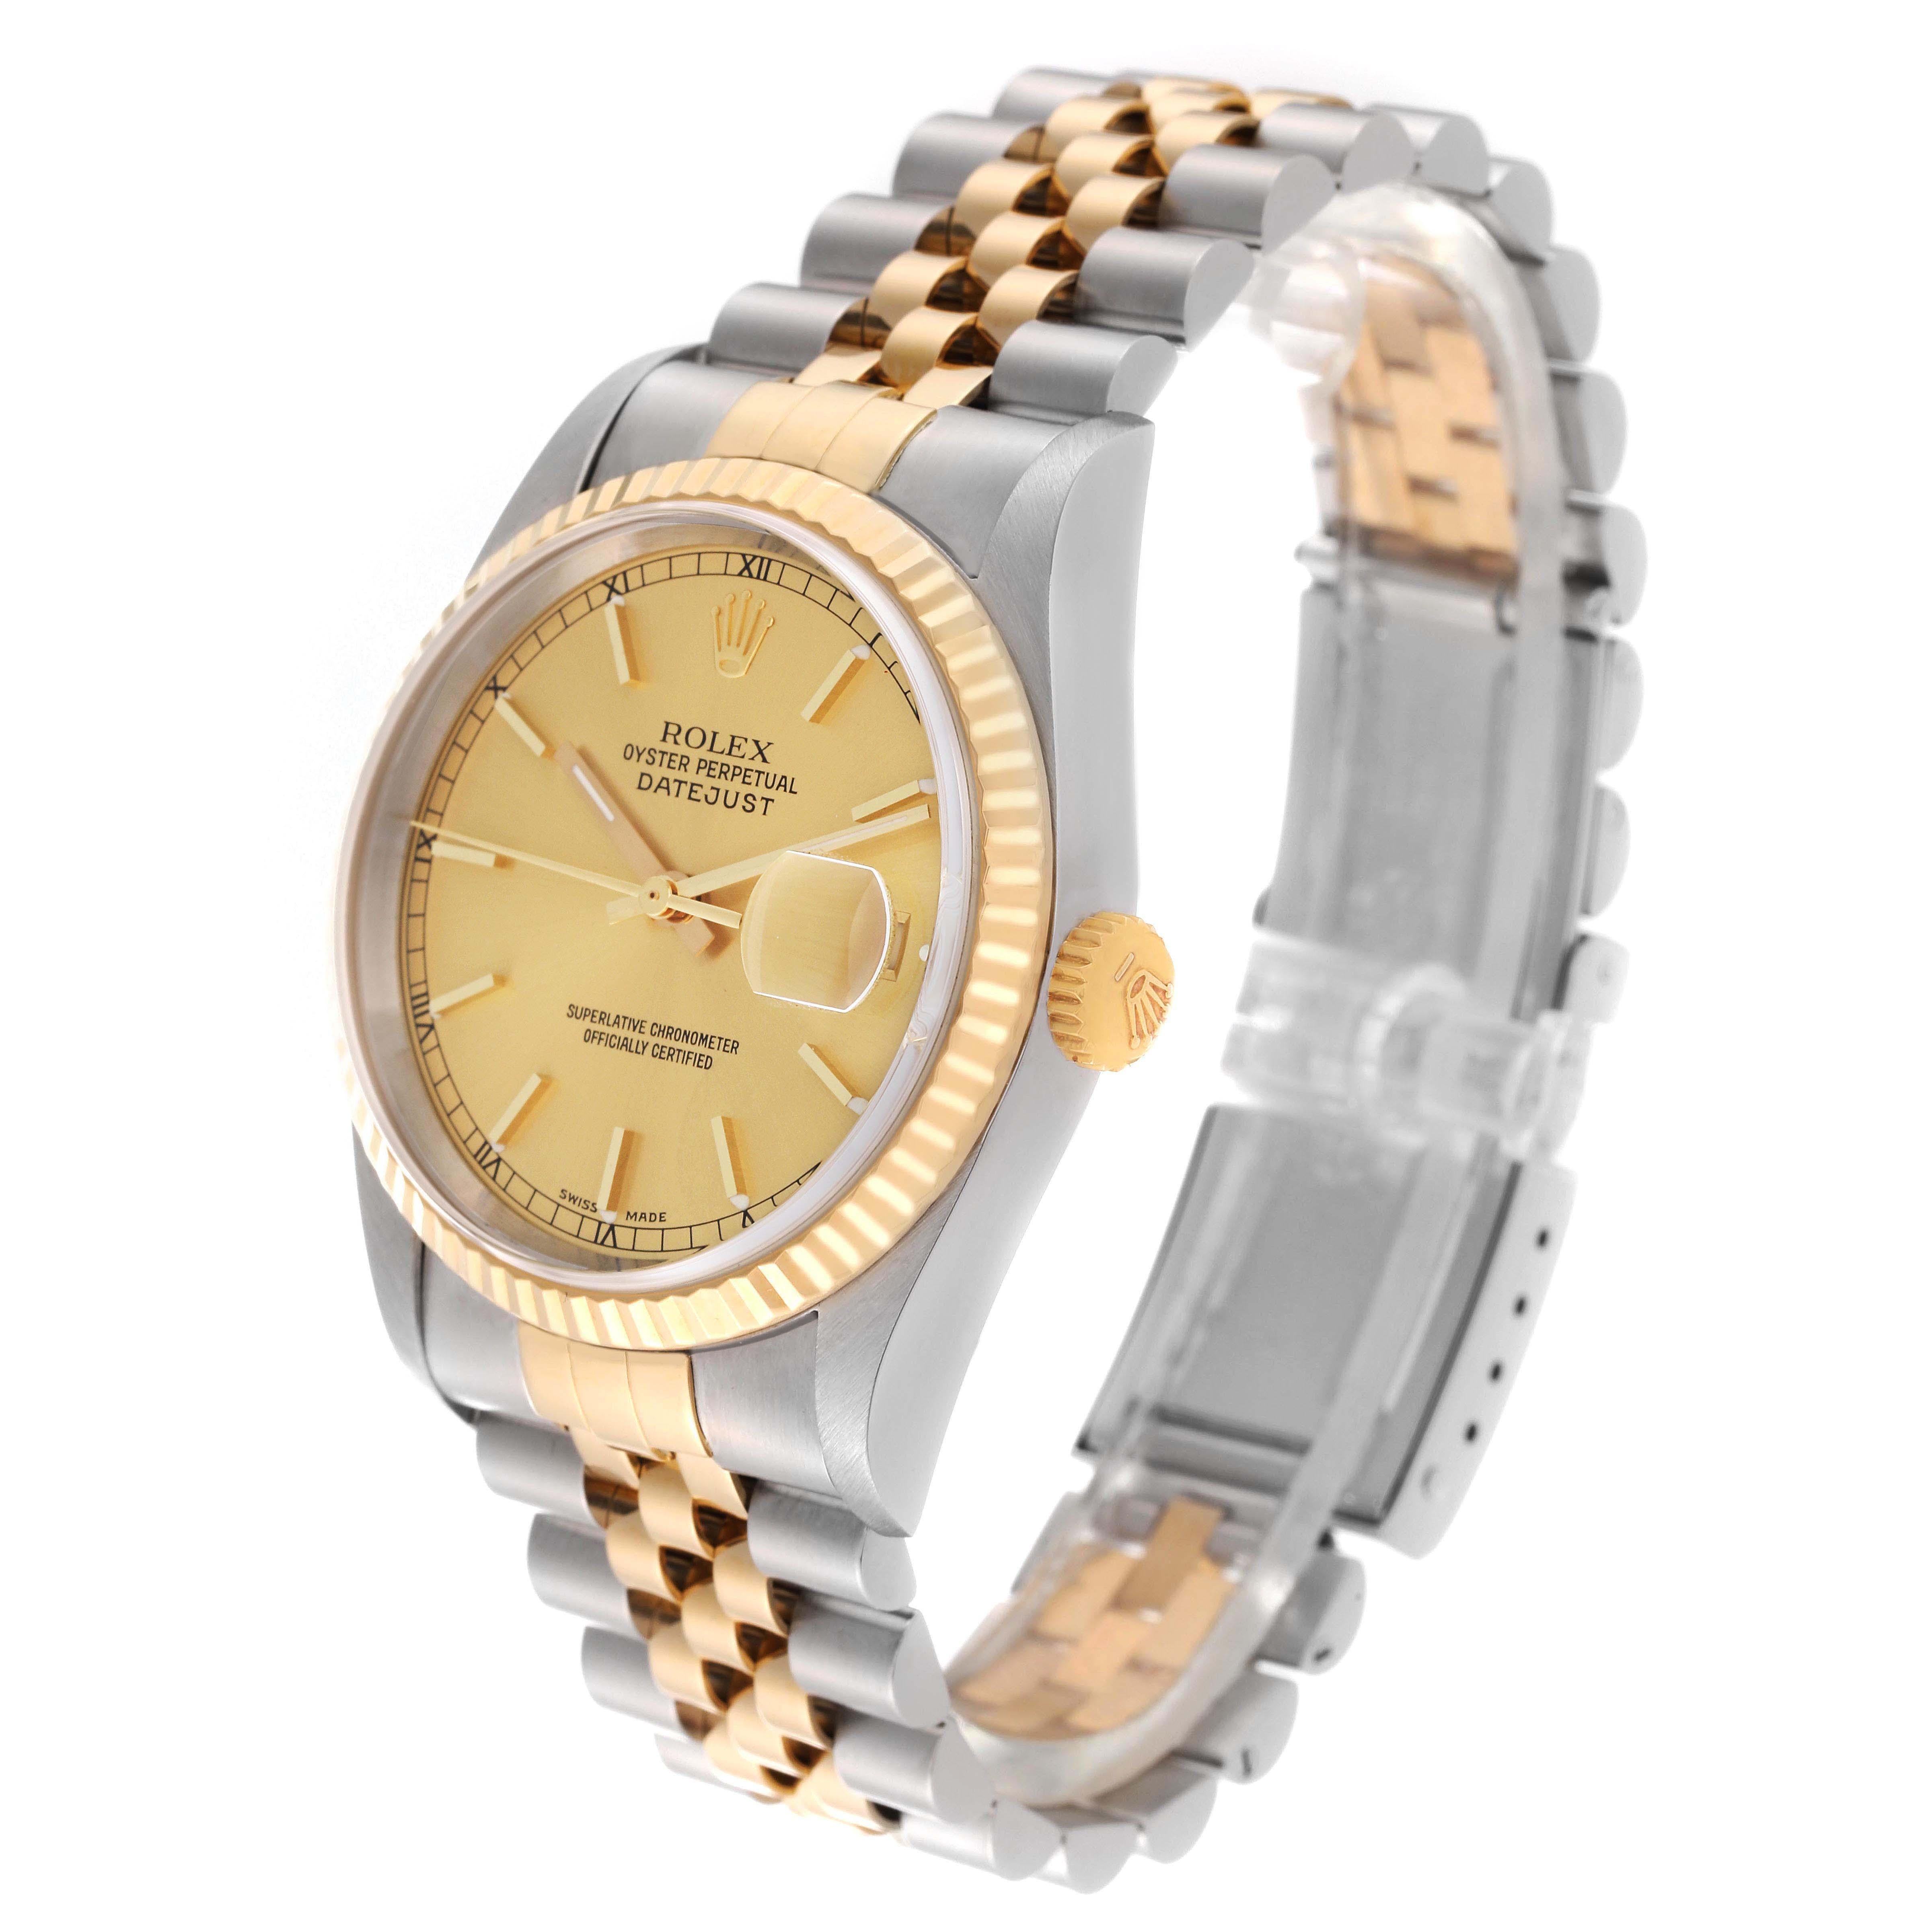 Rolex Datejust 36 Steel Yellow Gold Champagne Dial Mens Watch 16233 Box Papers For Sale 1